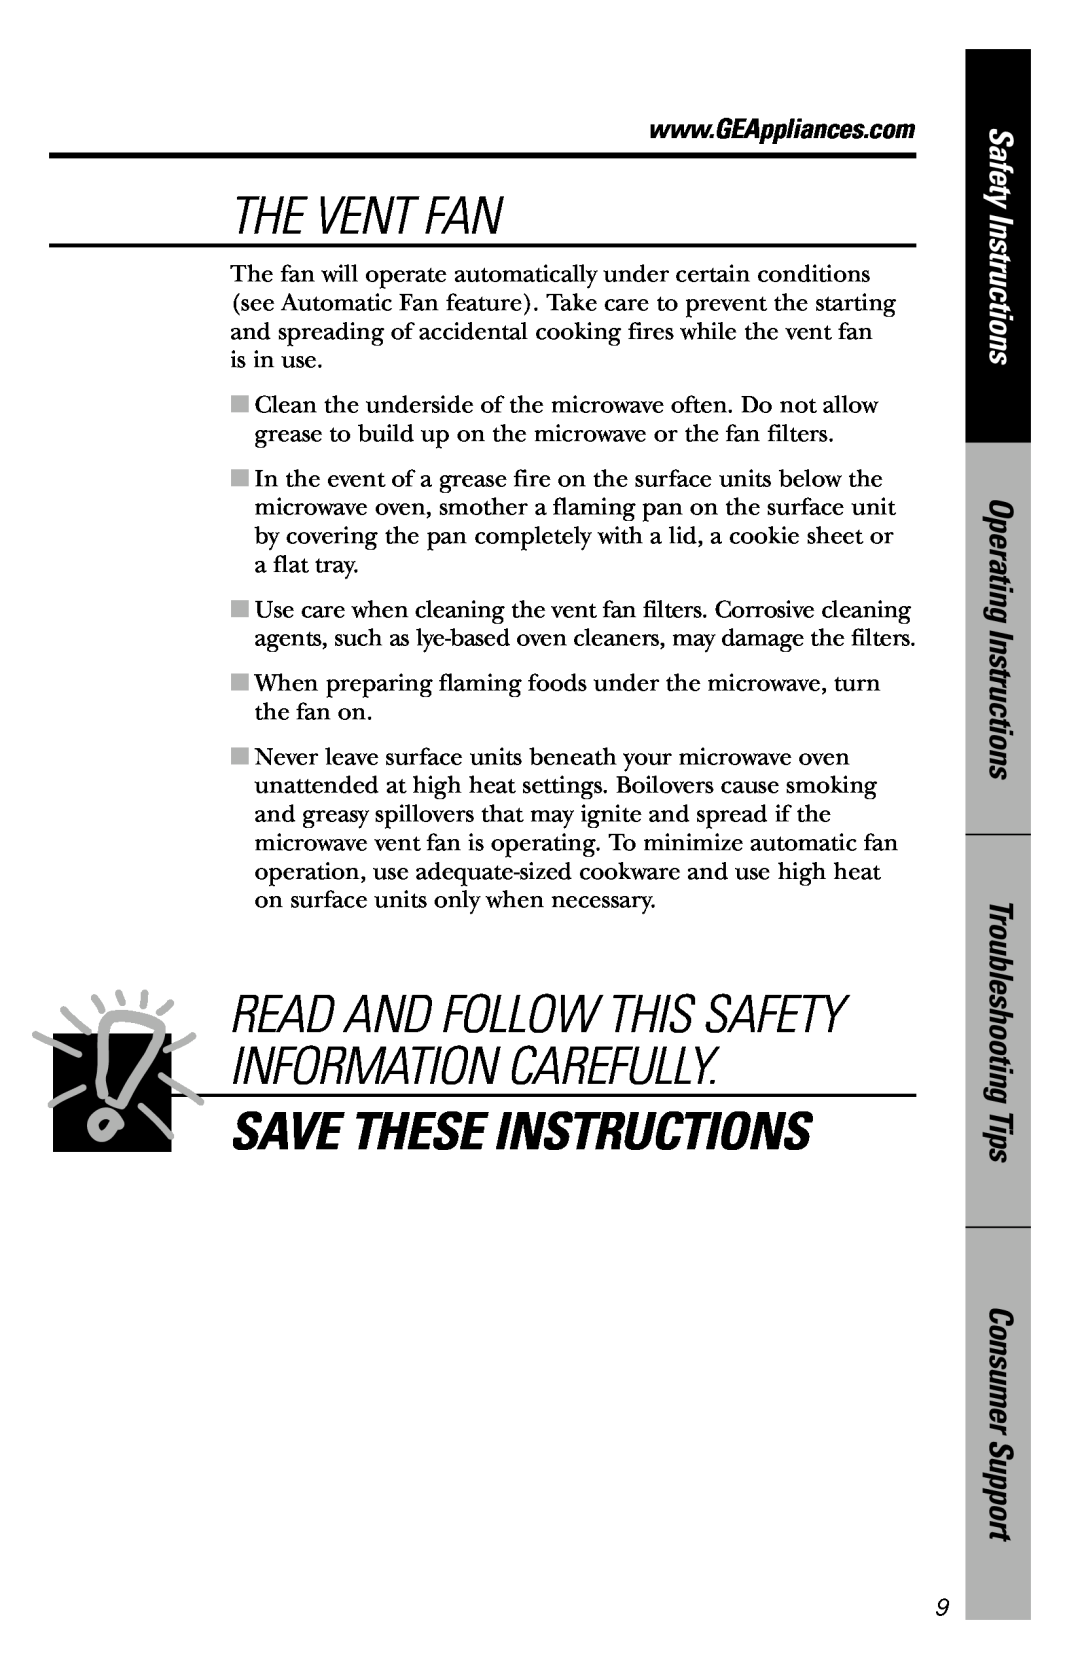 GE JVM3660CD The Vent Fan, Save These Instructions, Read And Follow This Safety Information Carefully, Safety Instructions 